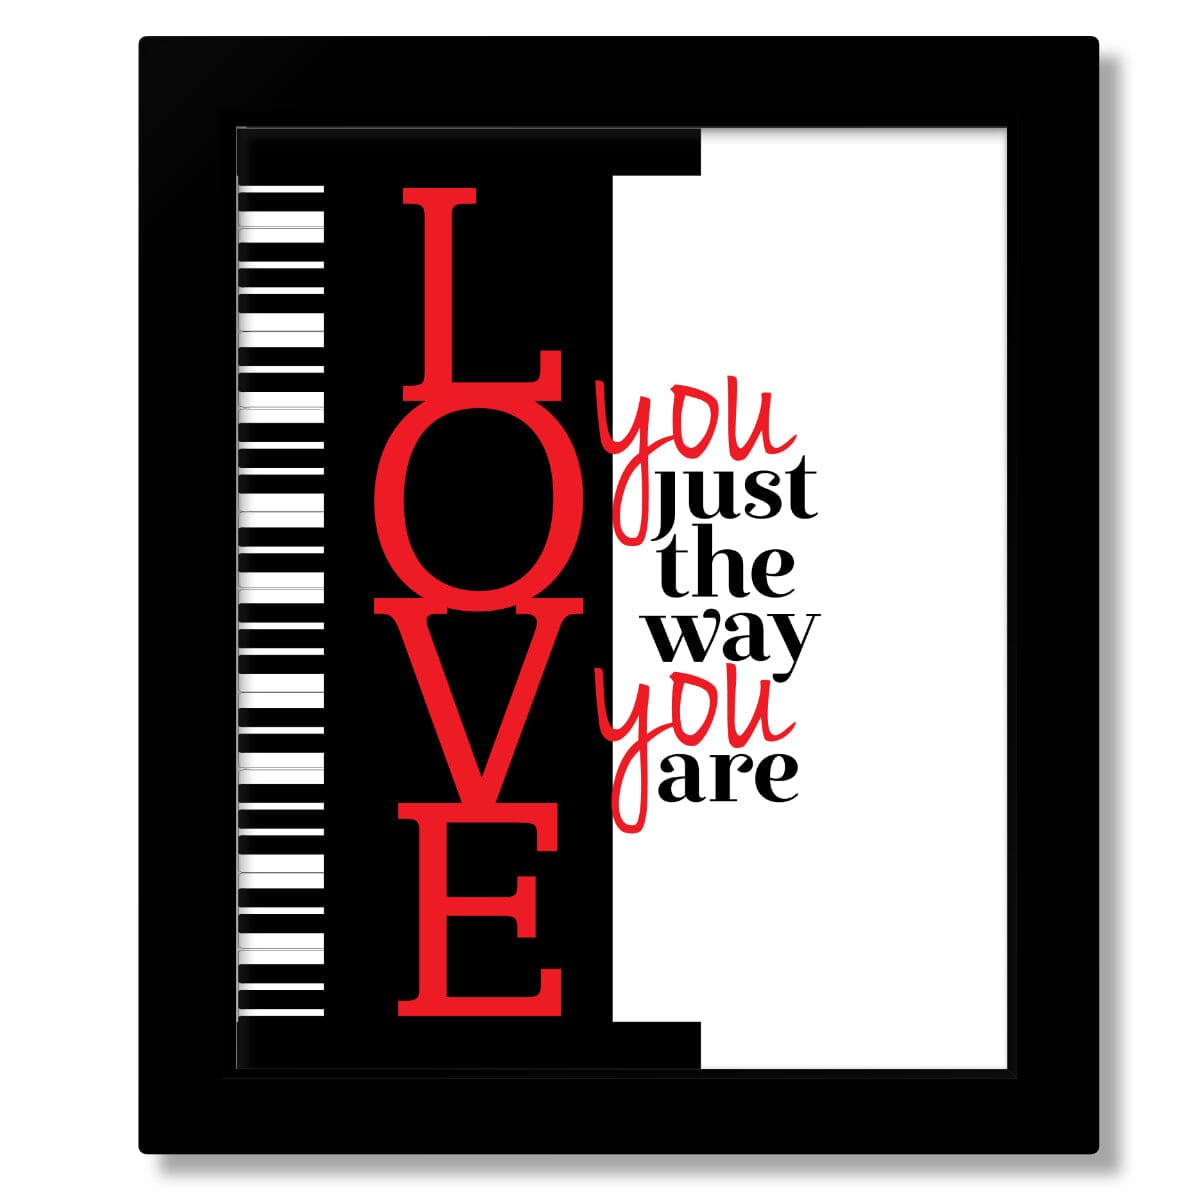 I Love You Just the Way You Are by Billy Joel - Lyrics Art Song Lyrics Art Song Lyrics Art 8x10 Framed Print (without mat) 